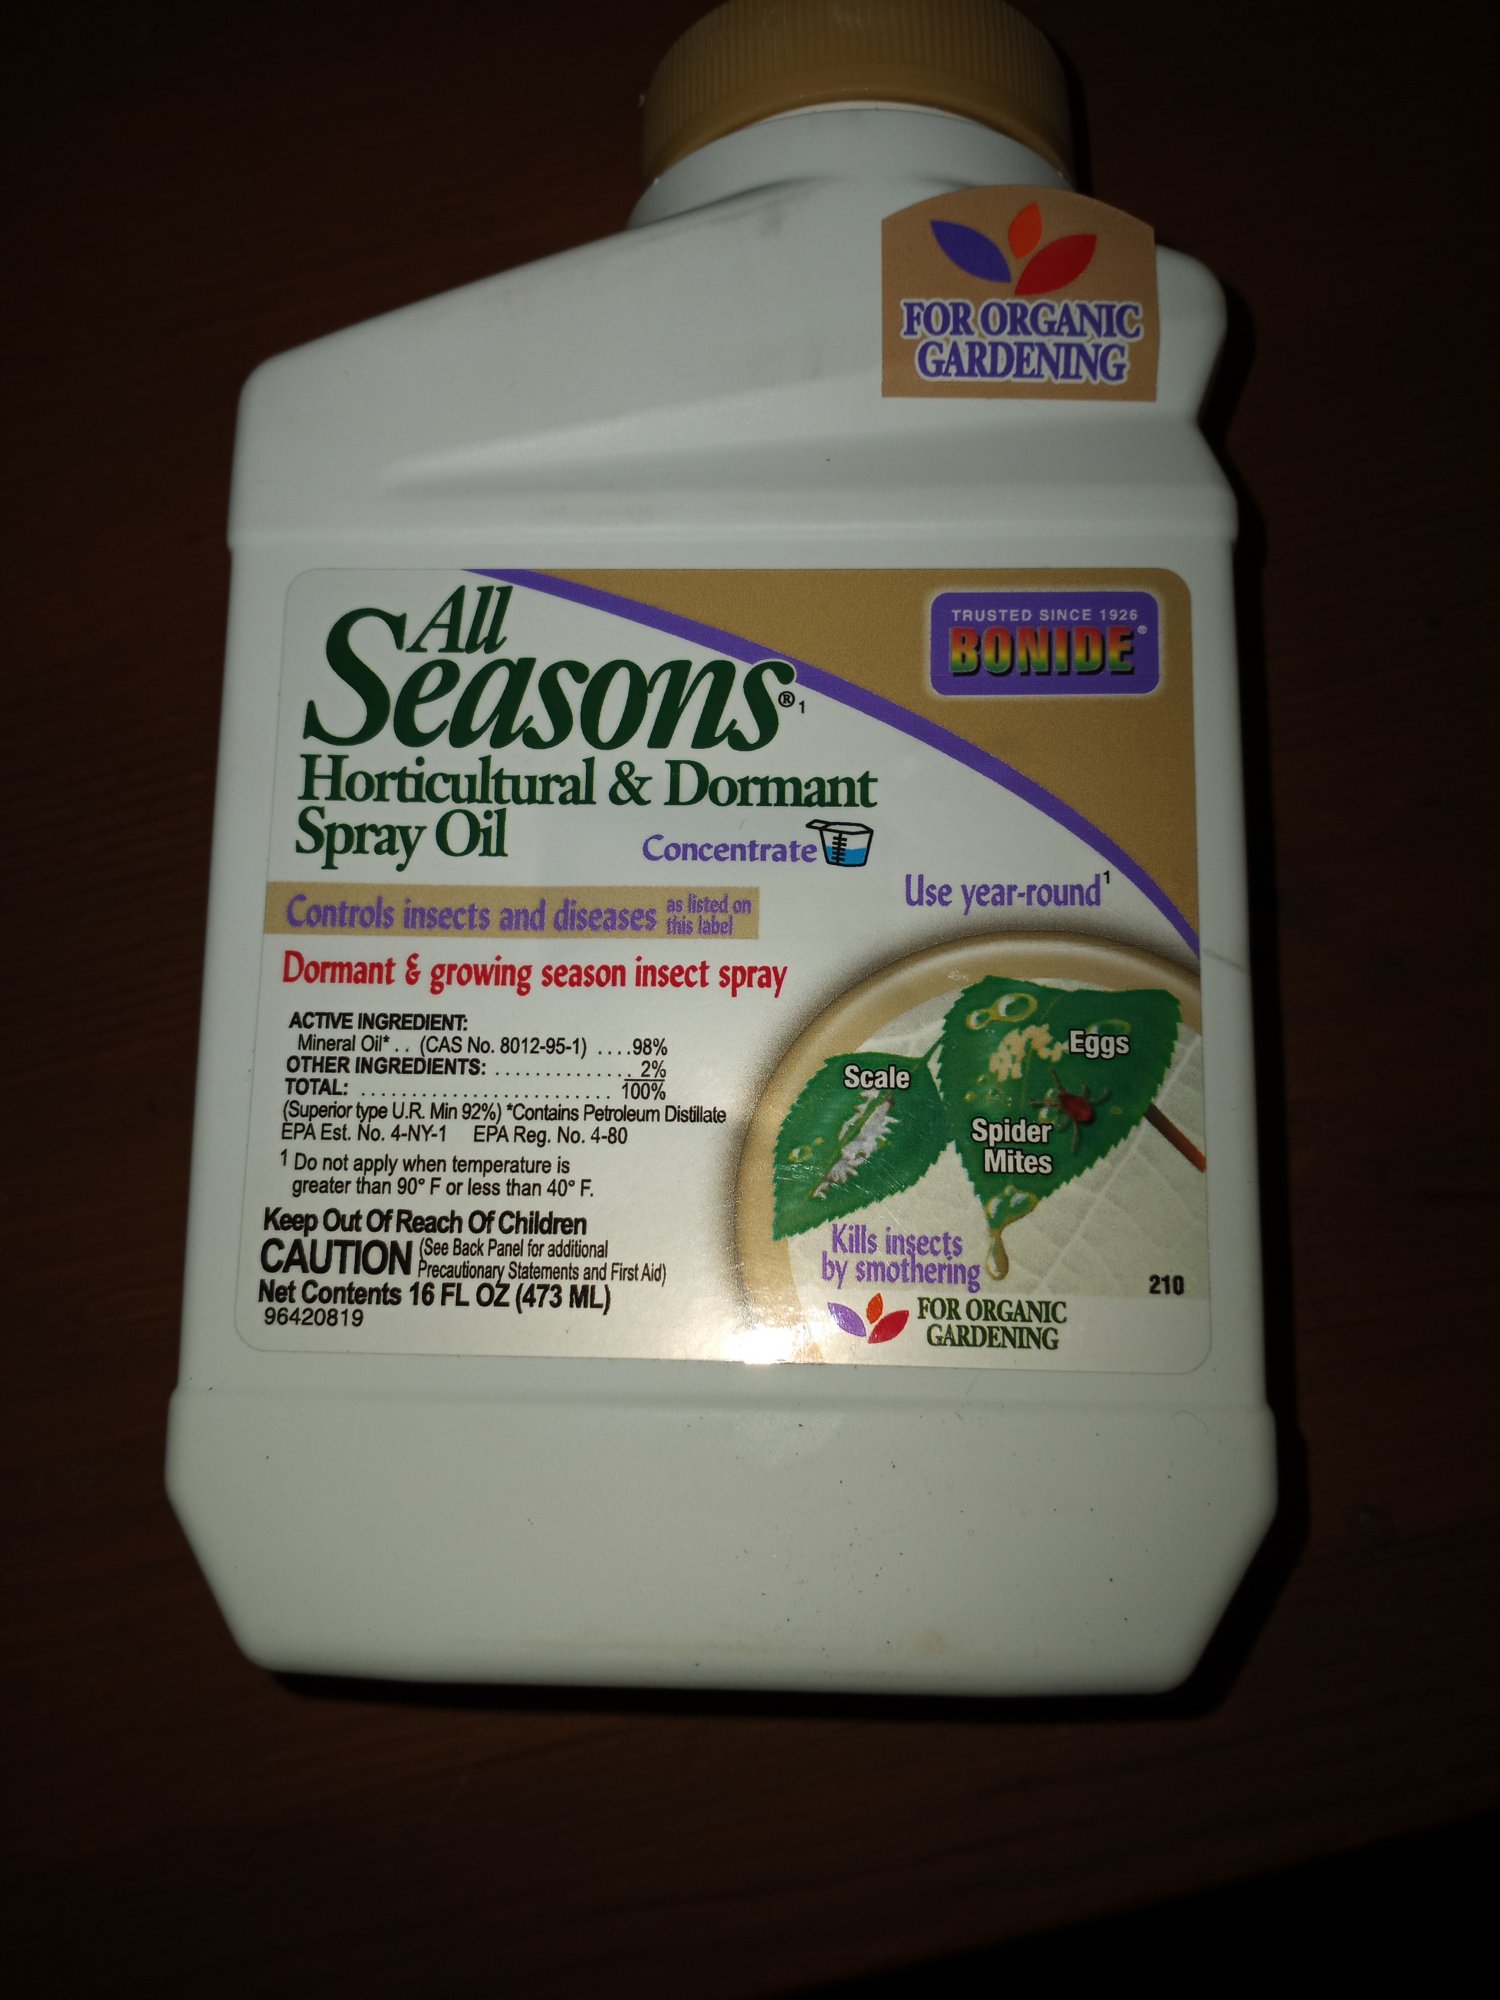 Is this safe to spray on my outdoor plants for mites